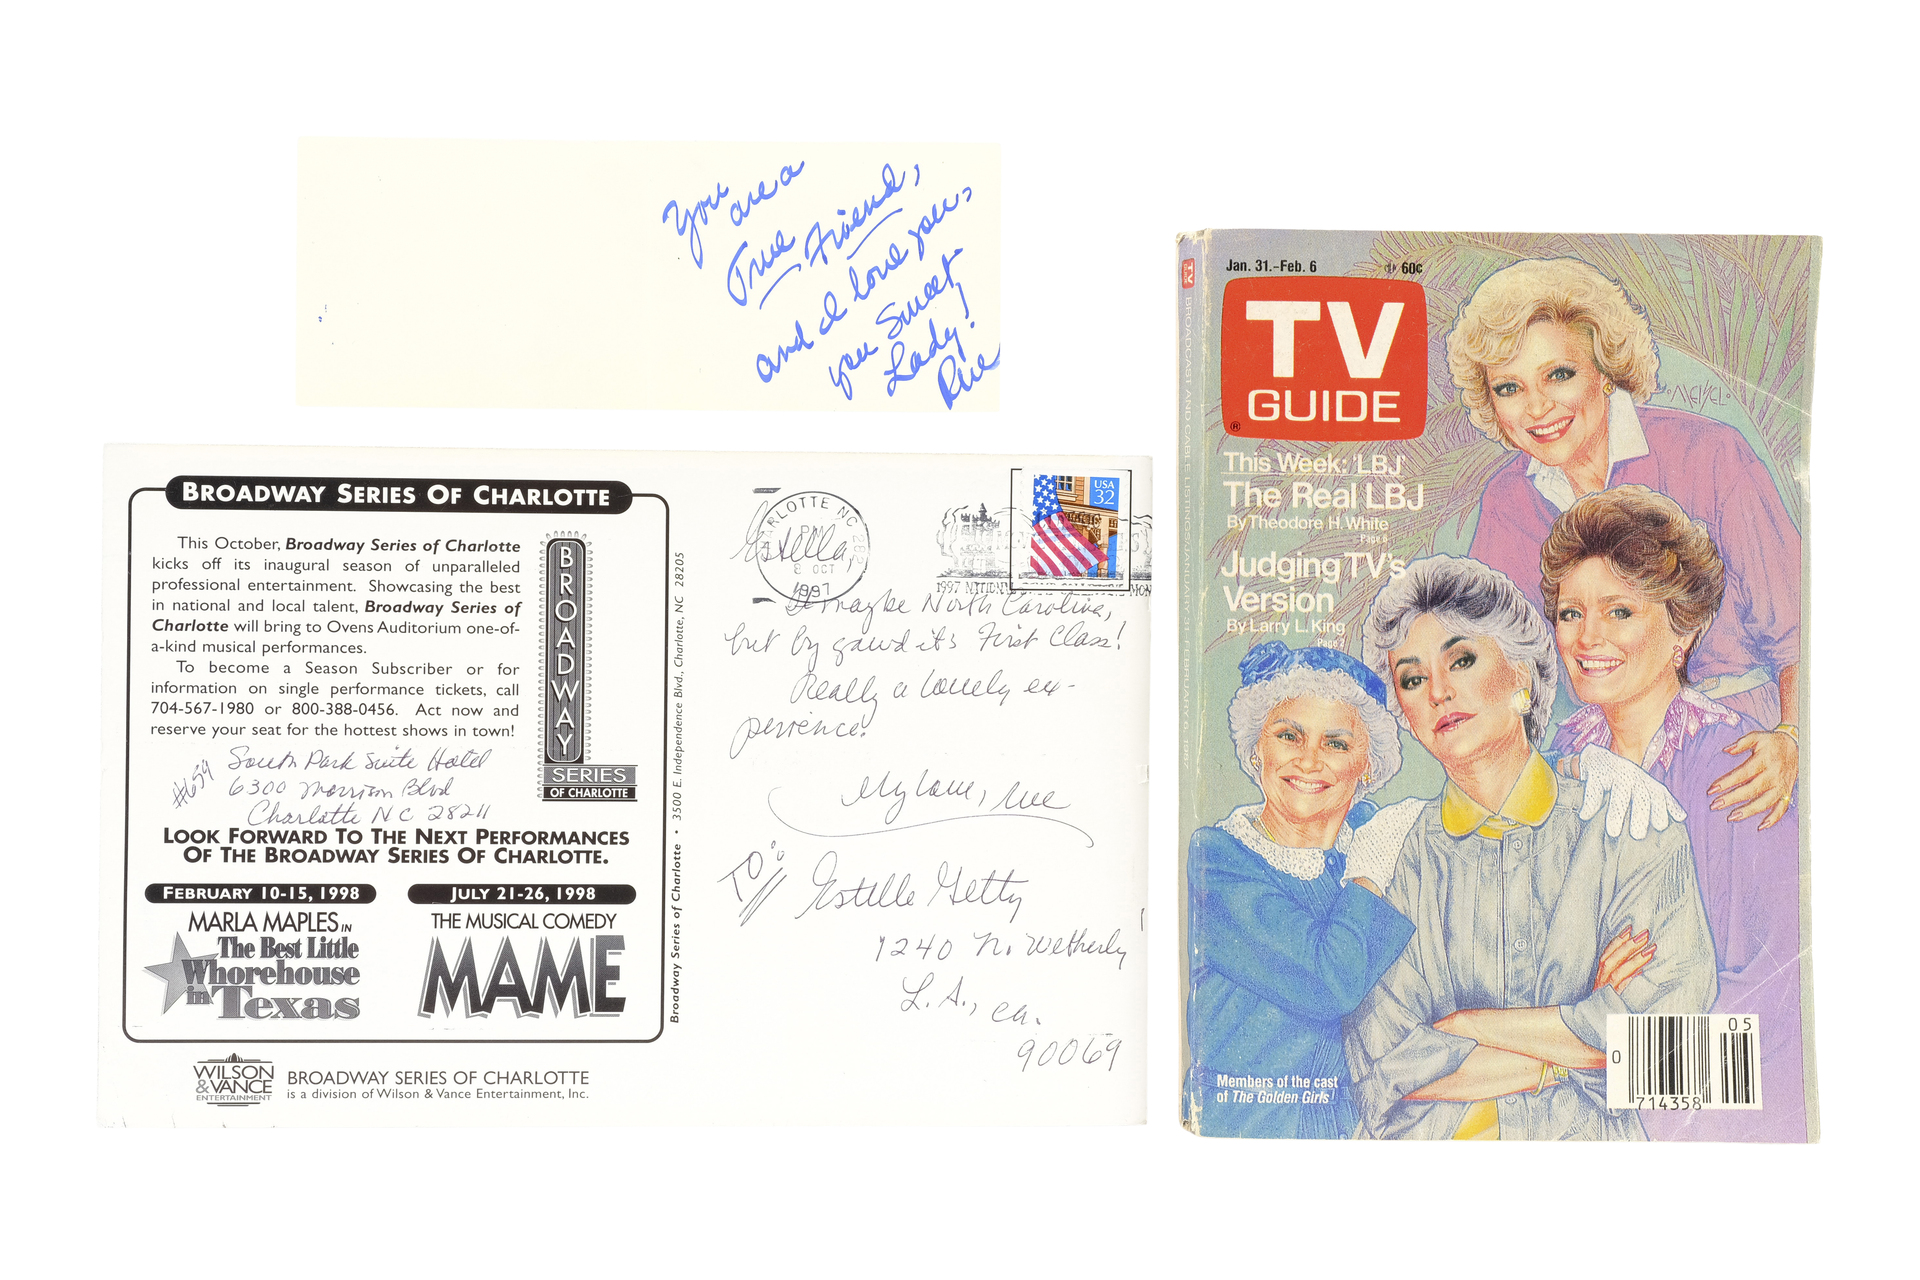 THE GOLDEN GIRLS (T.V. SERIES, 1985 - 1992) - Rue McClanahan's Wedding Invitation and Mail with TV G - Image 4 of 13